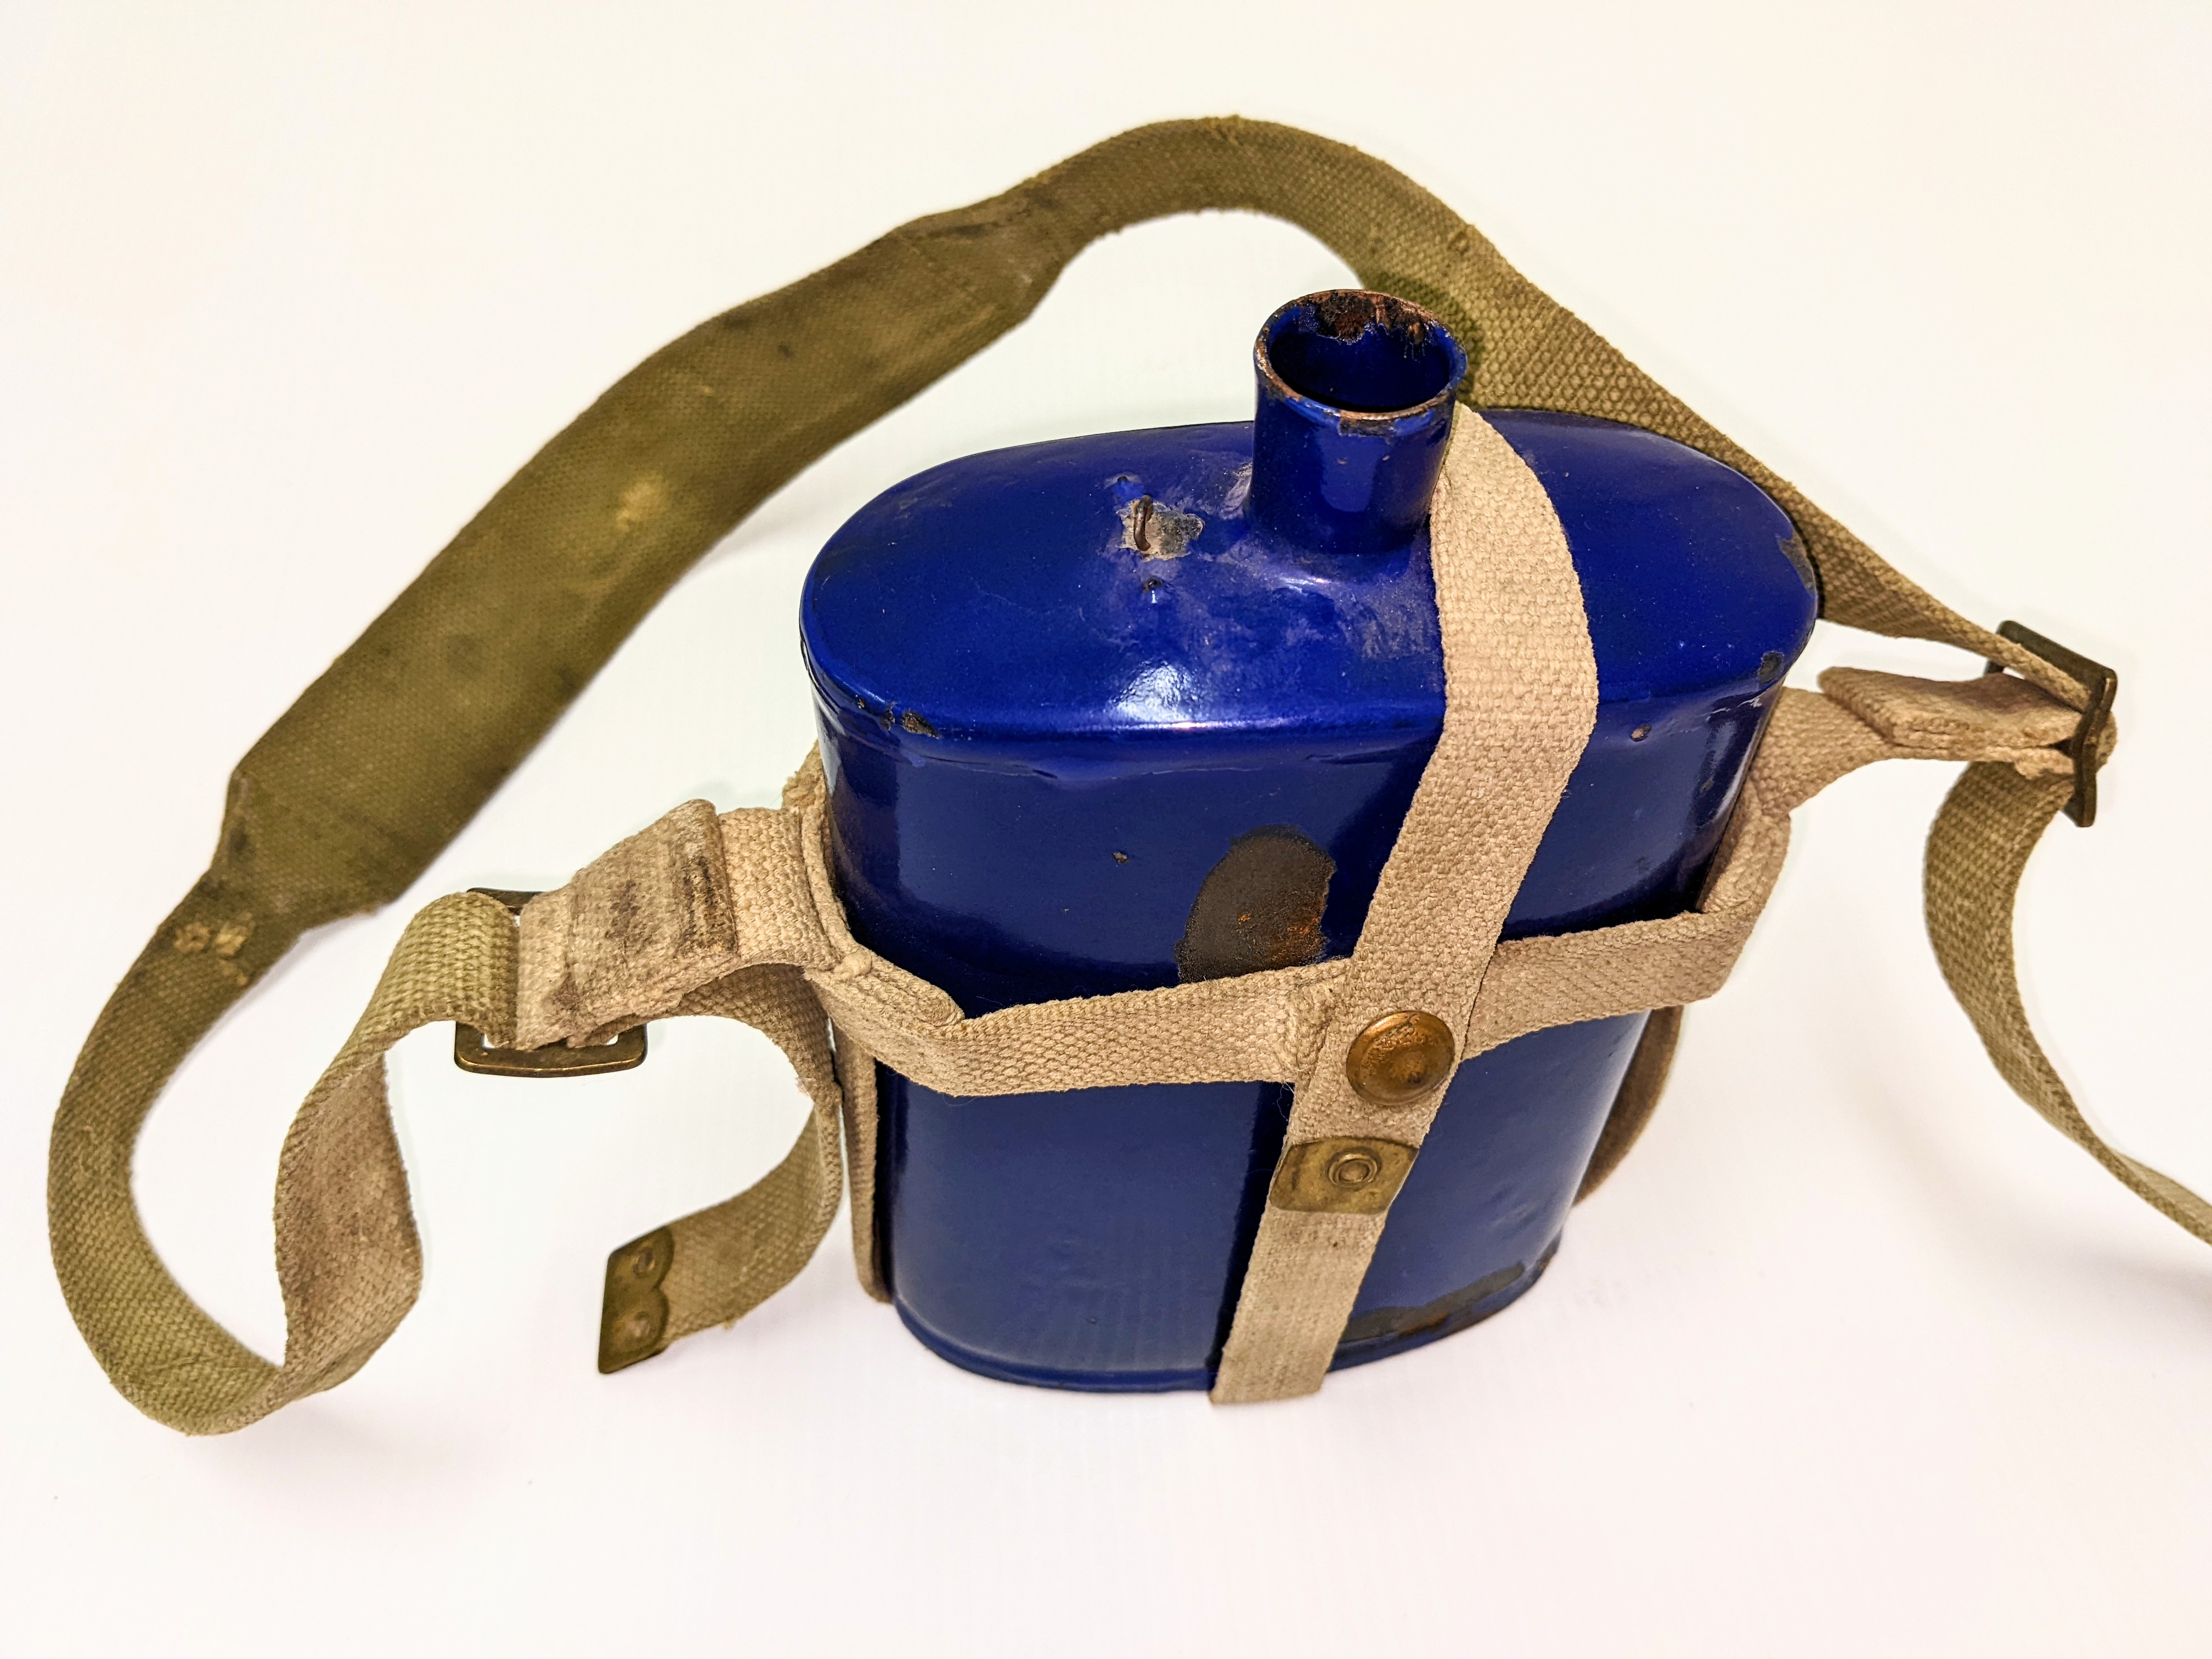 This is a Canadian WWII standard issue cobalt blue enamel waterbottle. The style of bottle was common amongst allied forces but small details such as the loop on the shoulder used to hold on the stopper (Missing) and design of the canvas carrying straps indicate it is Canadian made. It resides in the Eek, Marilyn Collection and was likely used by her Great Uncle Alfred During his years in service from 1943-1946.
03/01/2022
995.5.9 / Eek Marilyn